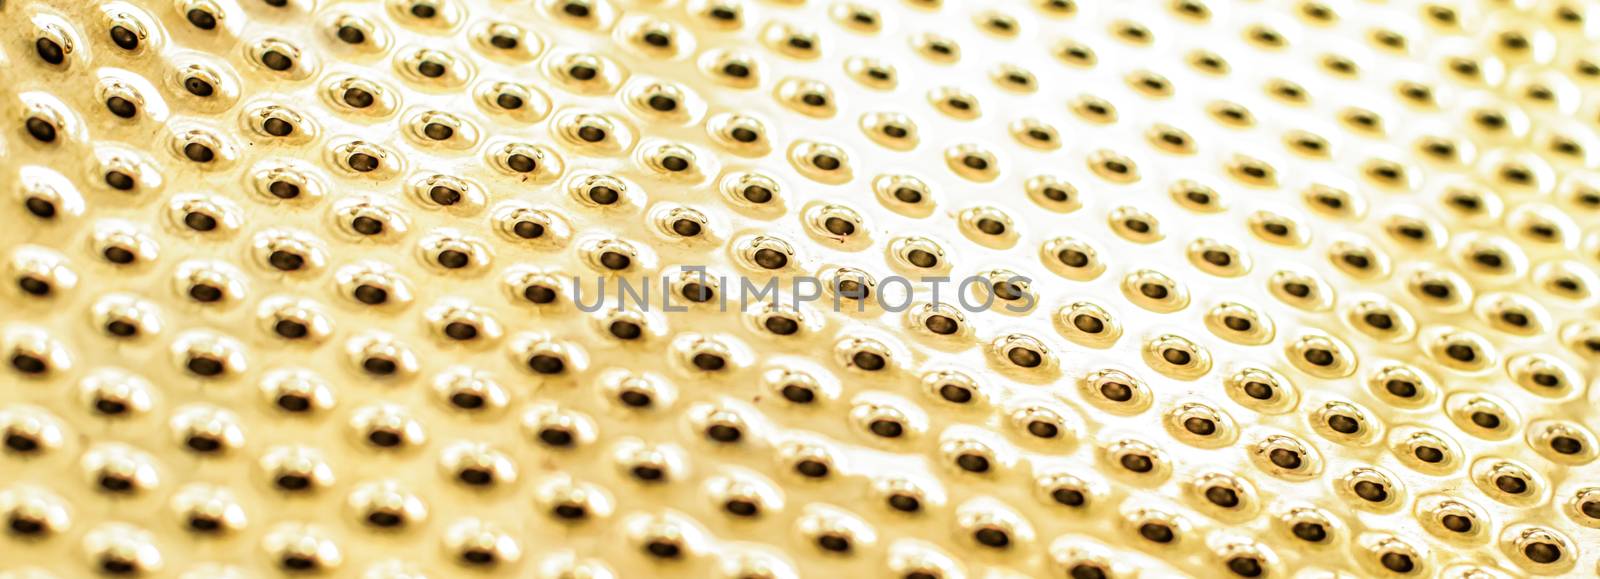 Texture of golden metallic surface as background, materials and interior design concept